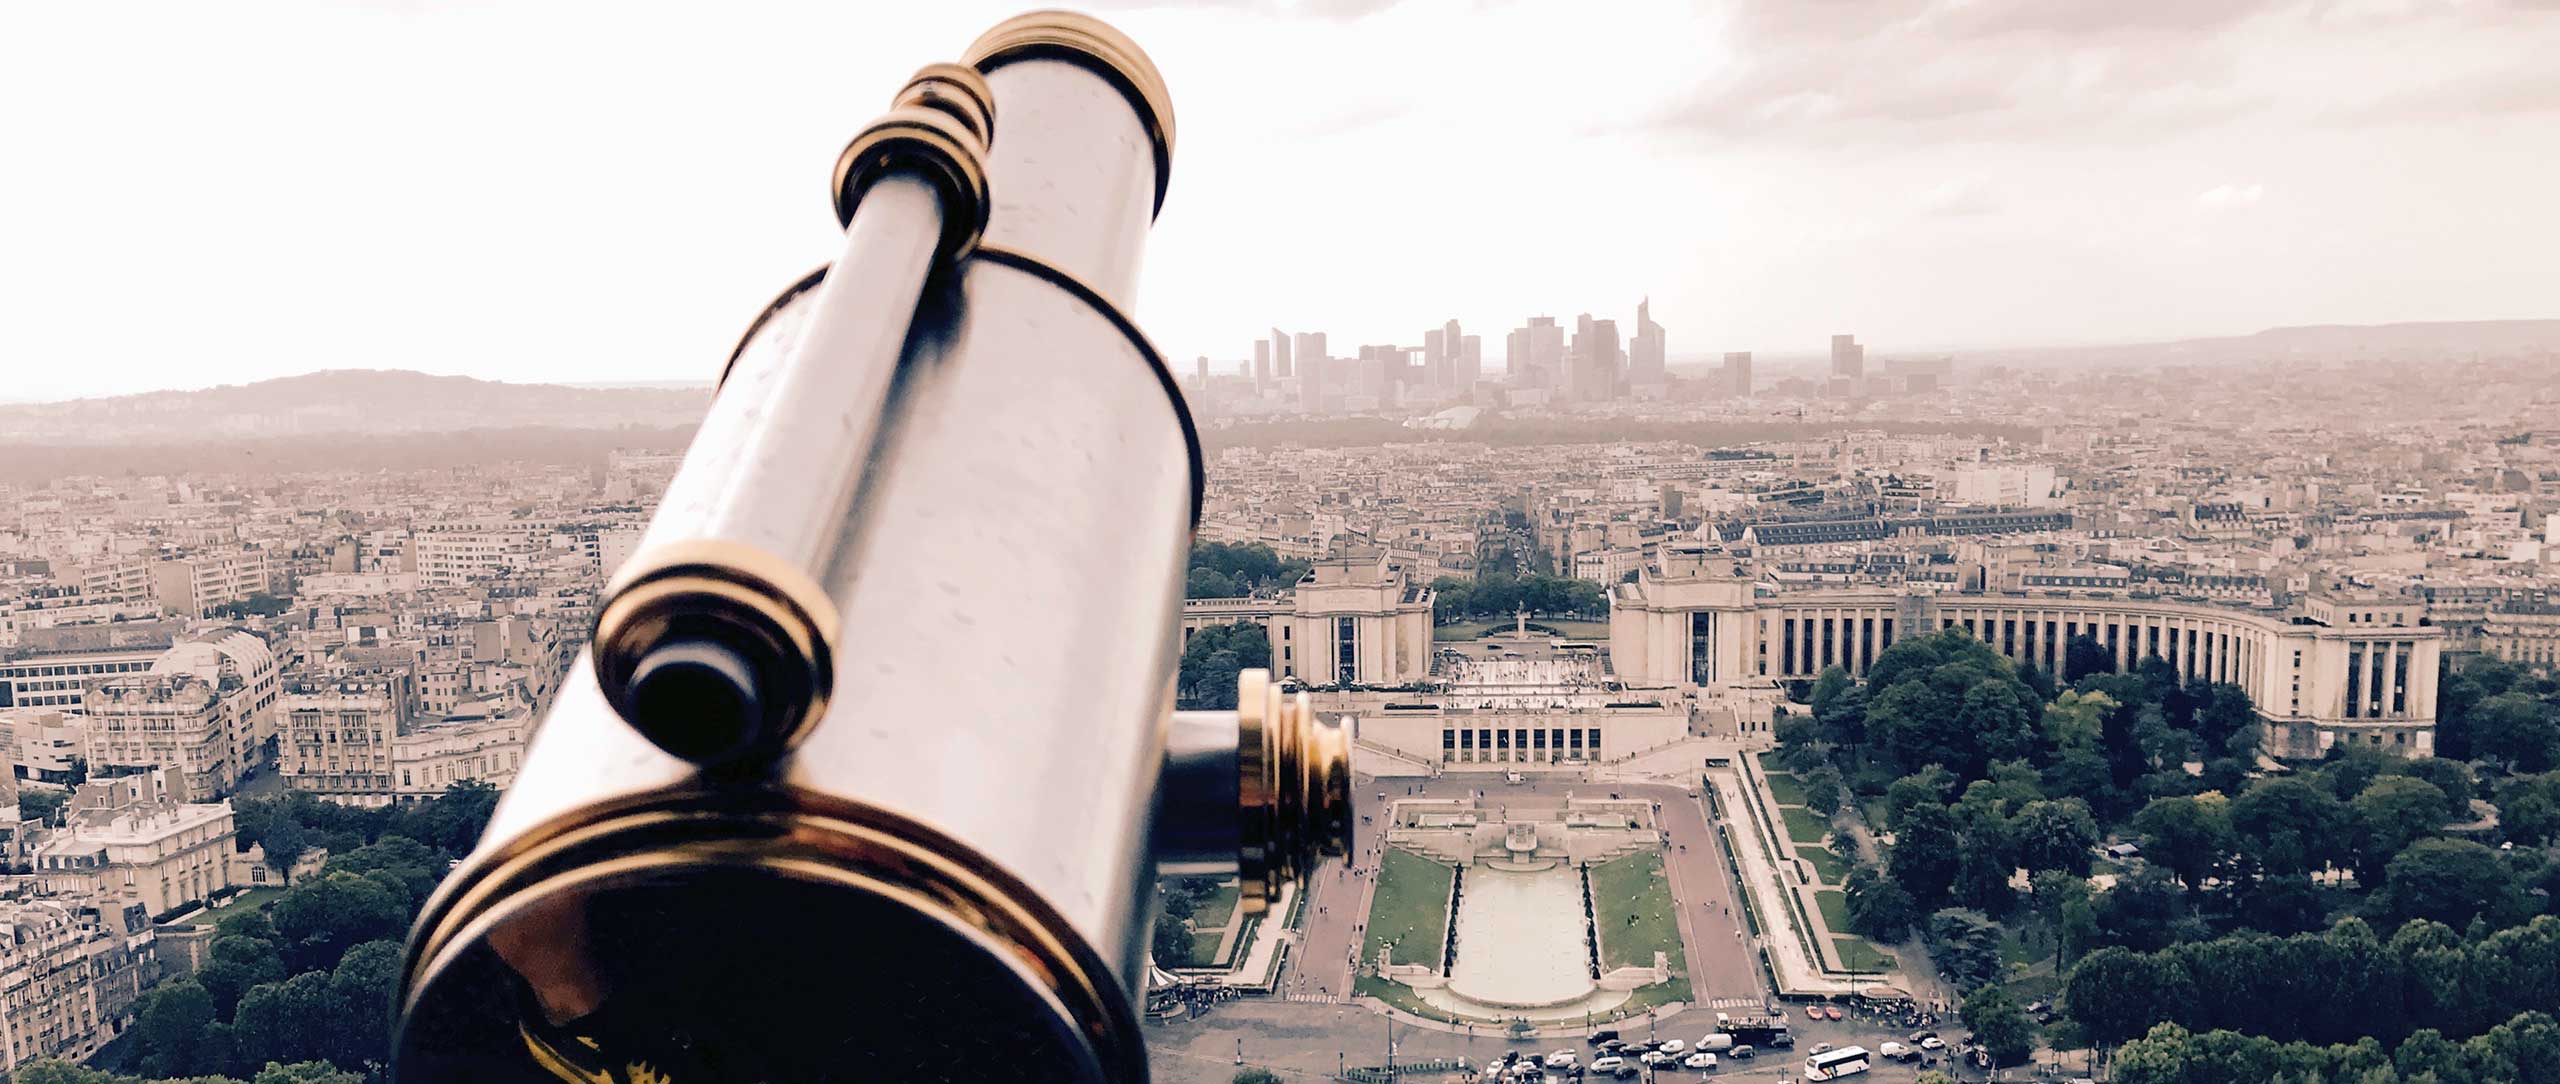 On top of Eiffel Tower next to some binoculars.